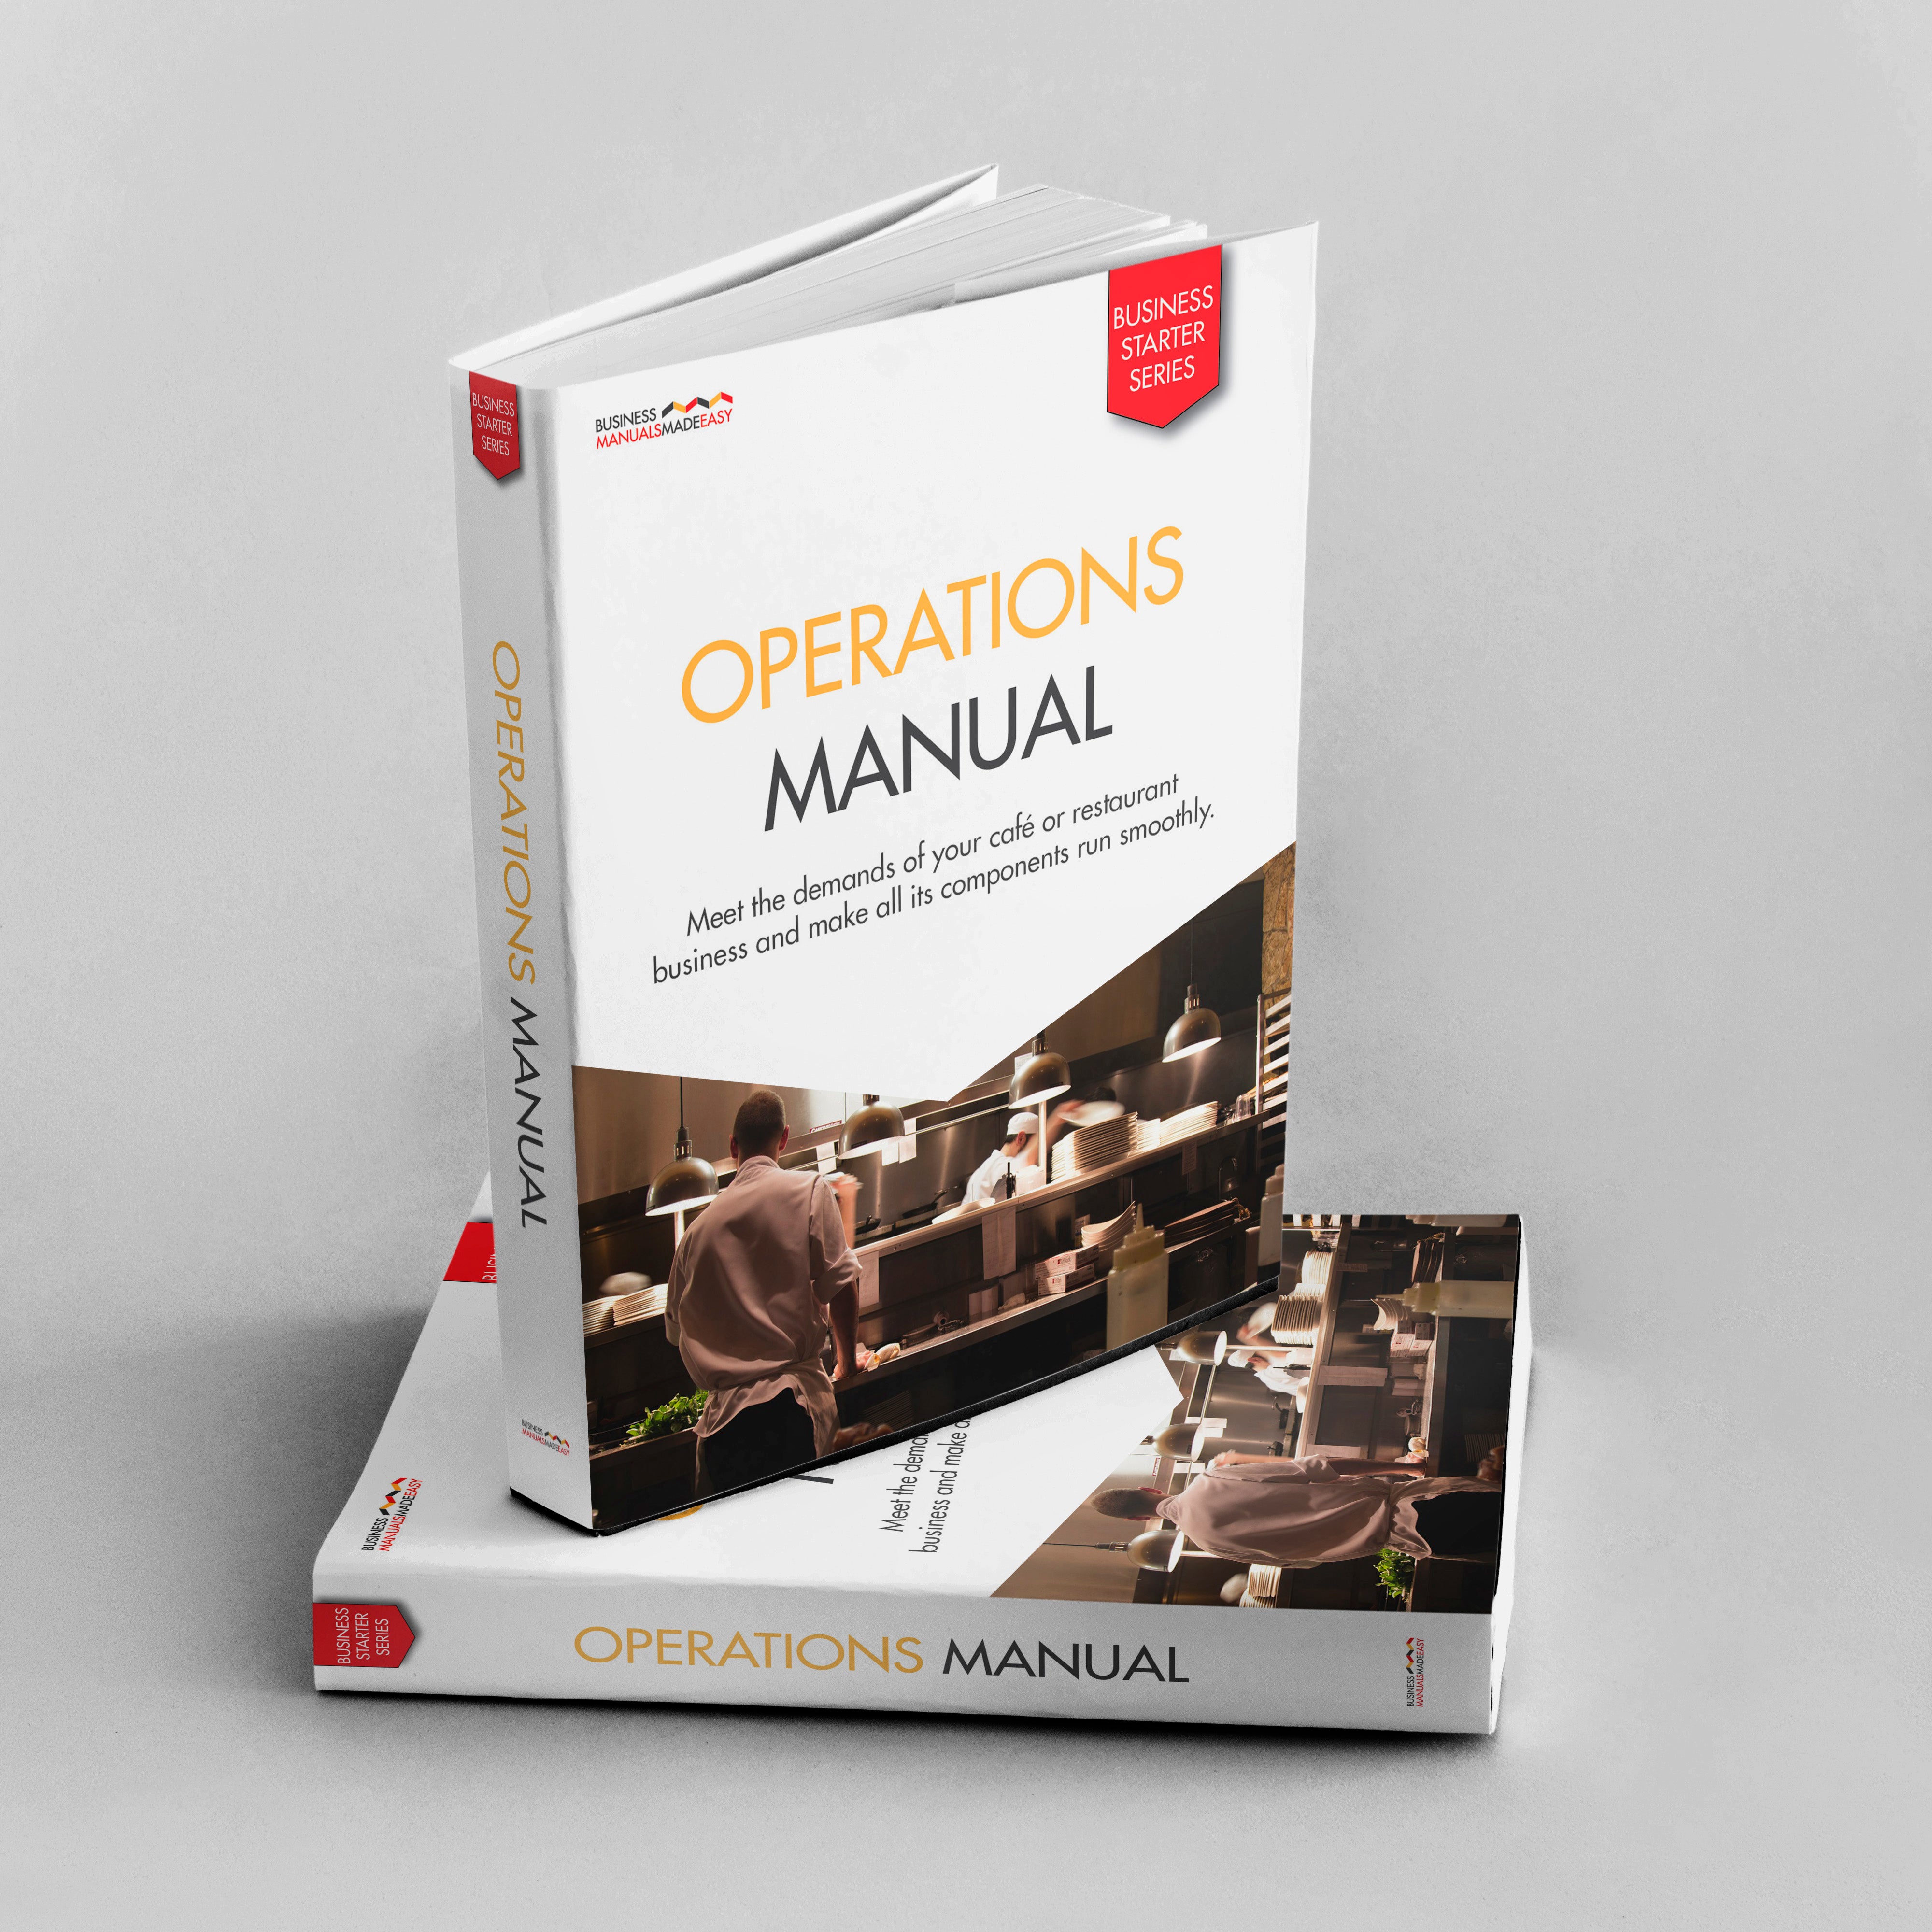 Business Manuals Made Easy - Operations Manual - Organize your workplace, reduce mistakes and improve service.